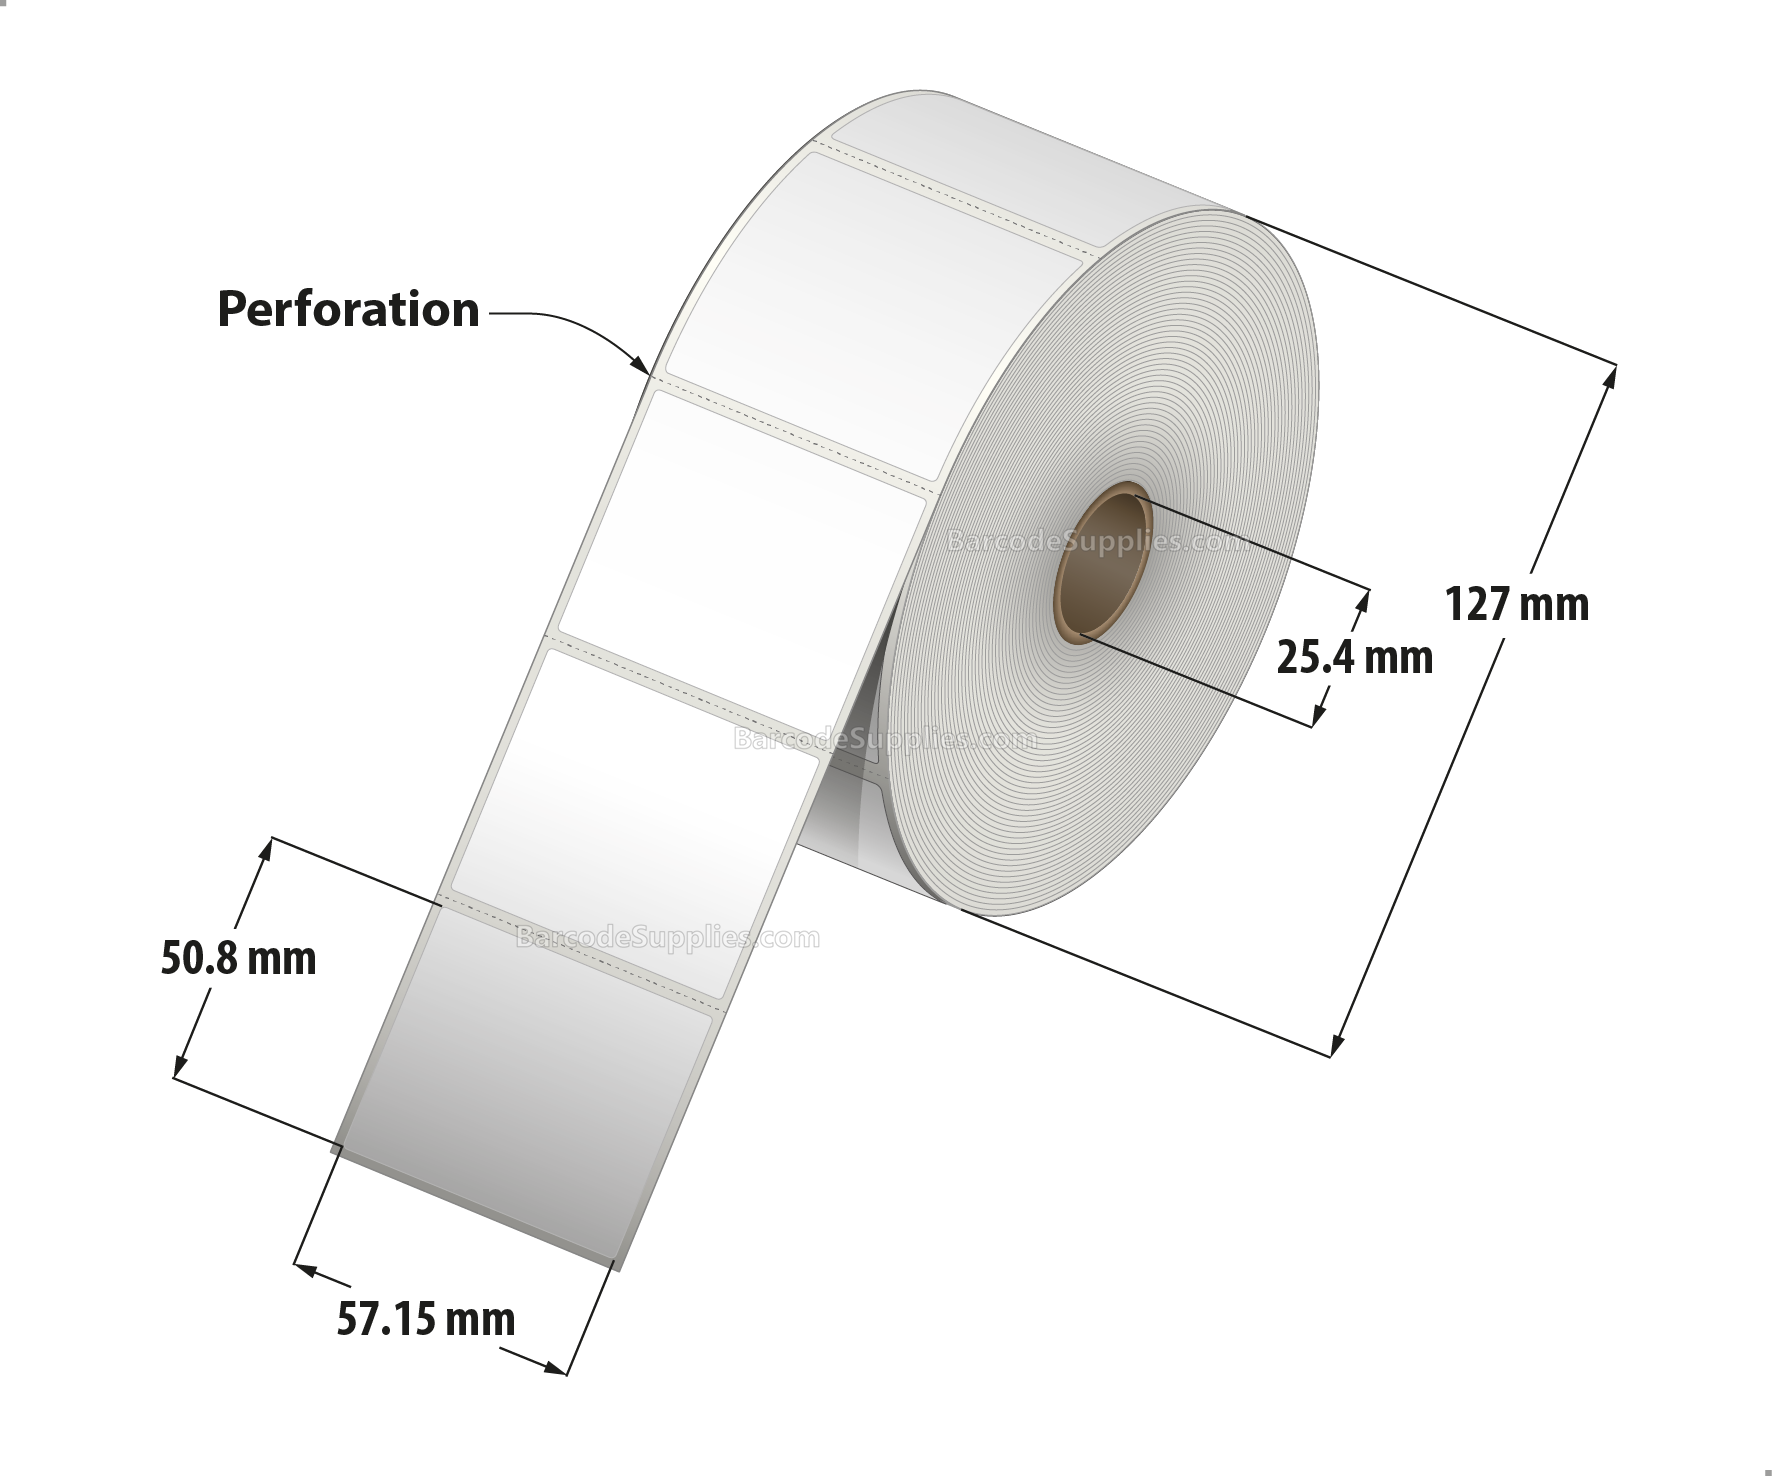 2.25 x 2 Direct Thermal White Labels With Permanent Acrylic Adhesive - Perforated - 1370 Labels Per Roll - Carton Of 4 Rolls - 5480 Labels Total - MPN: DT2252-15PDT